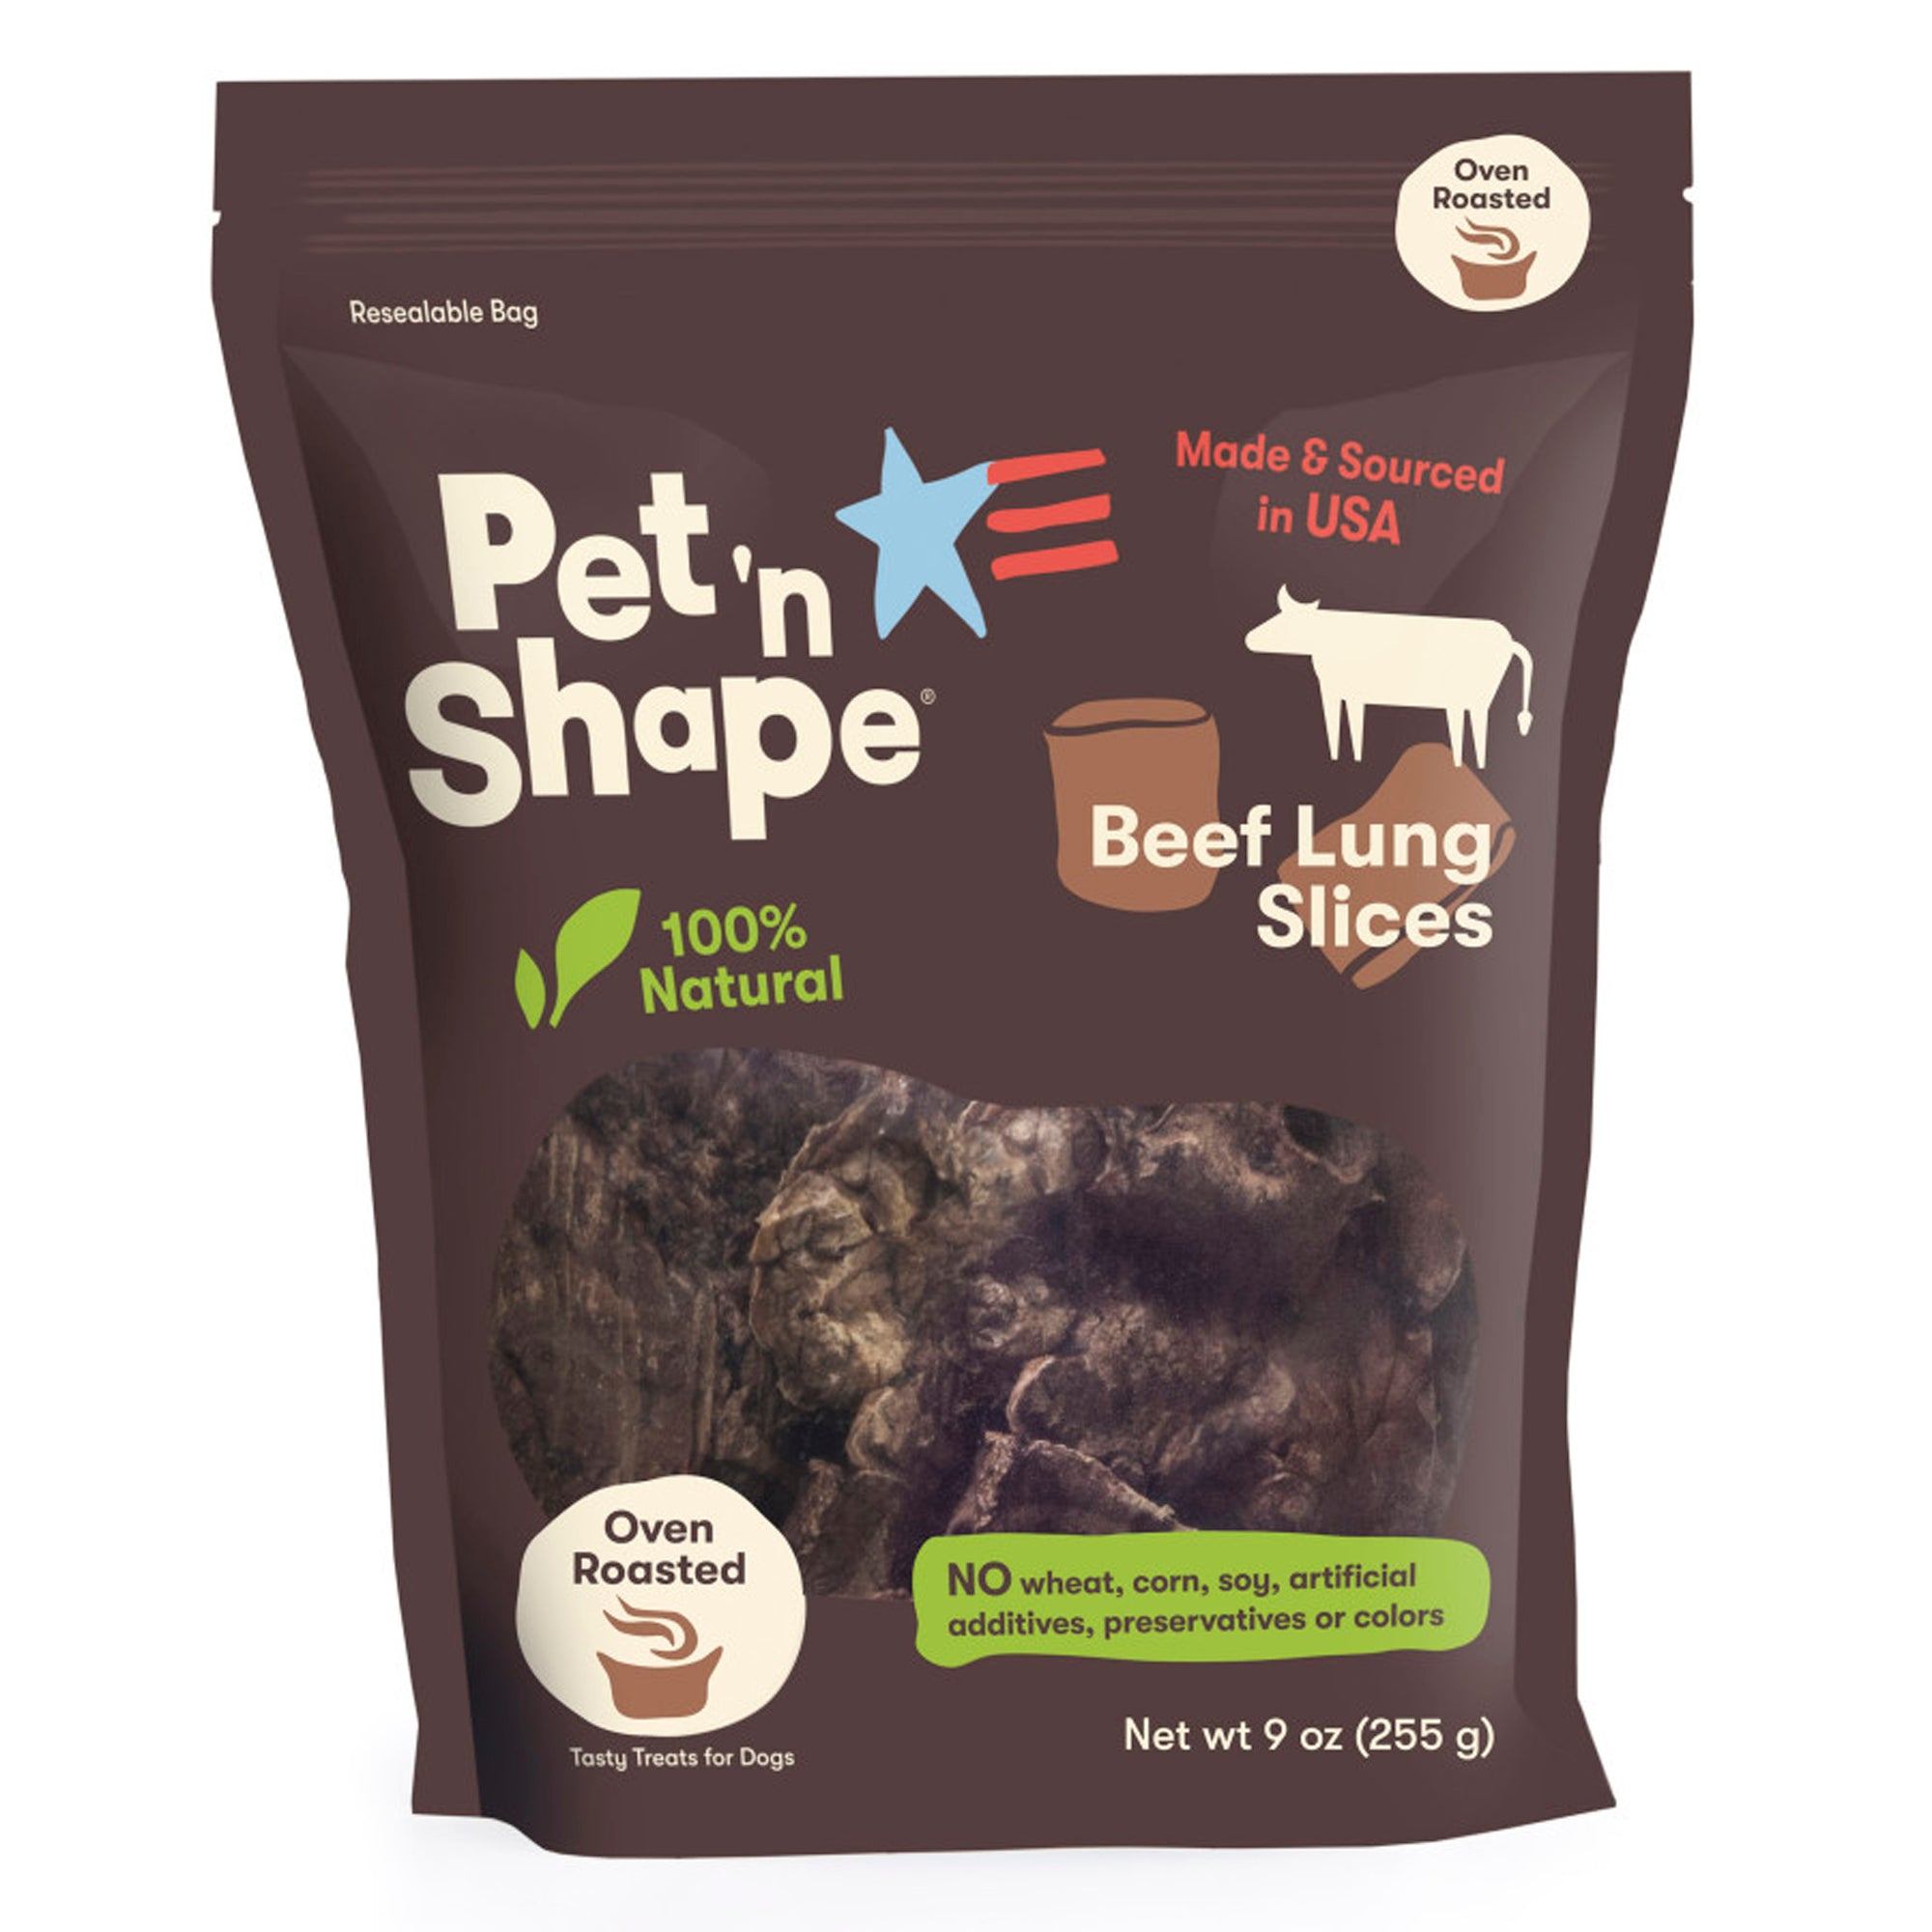 Pet N Shape Natural Oven Roasted Beef Lung Slices Dog Treat 9 oz